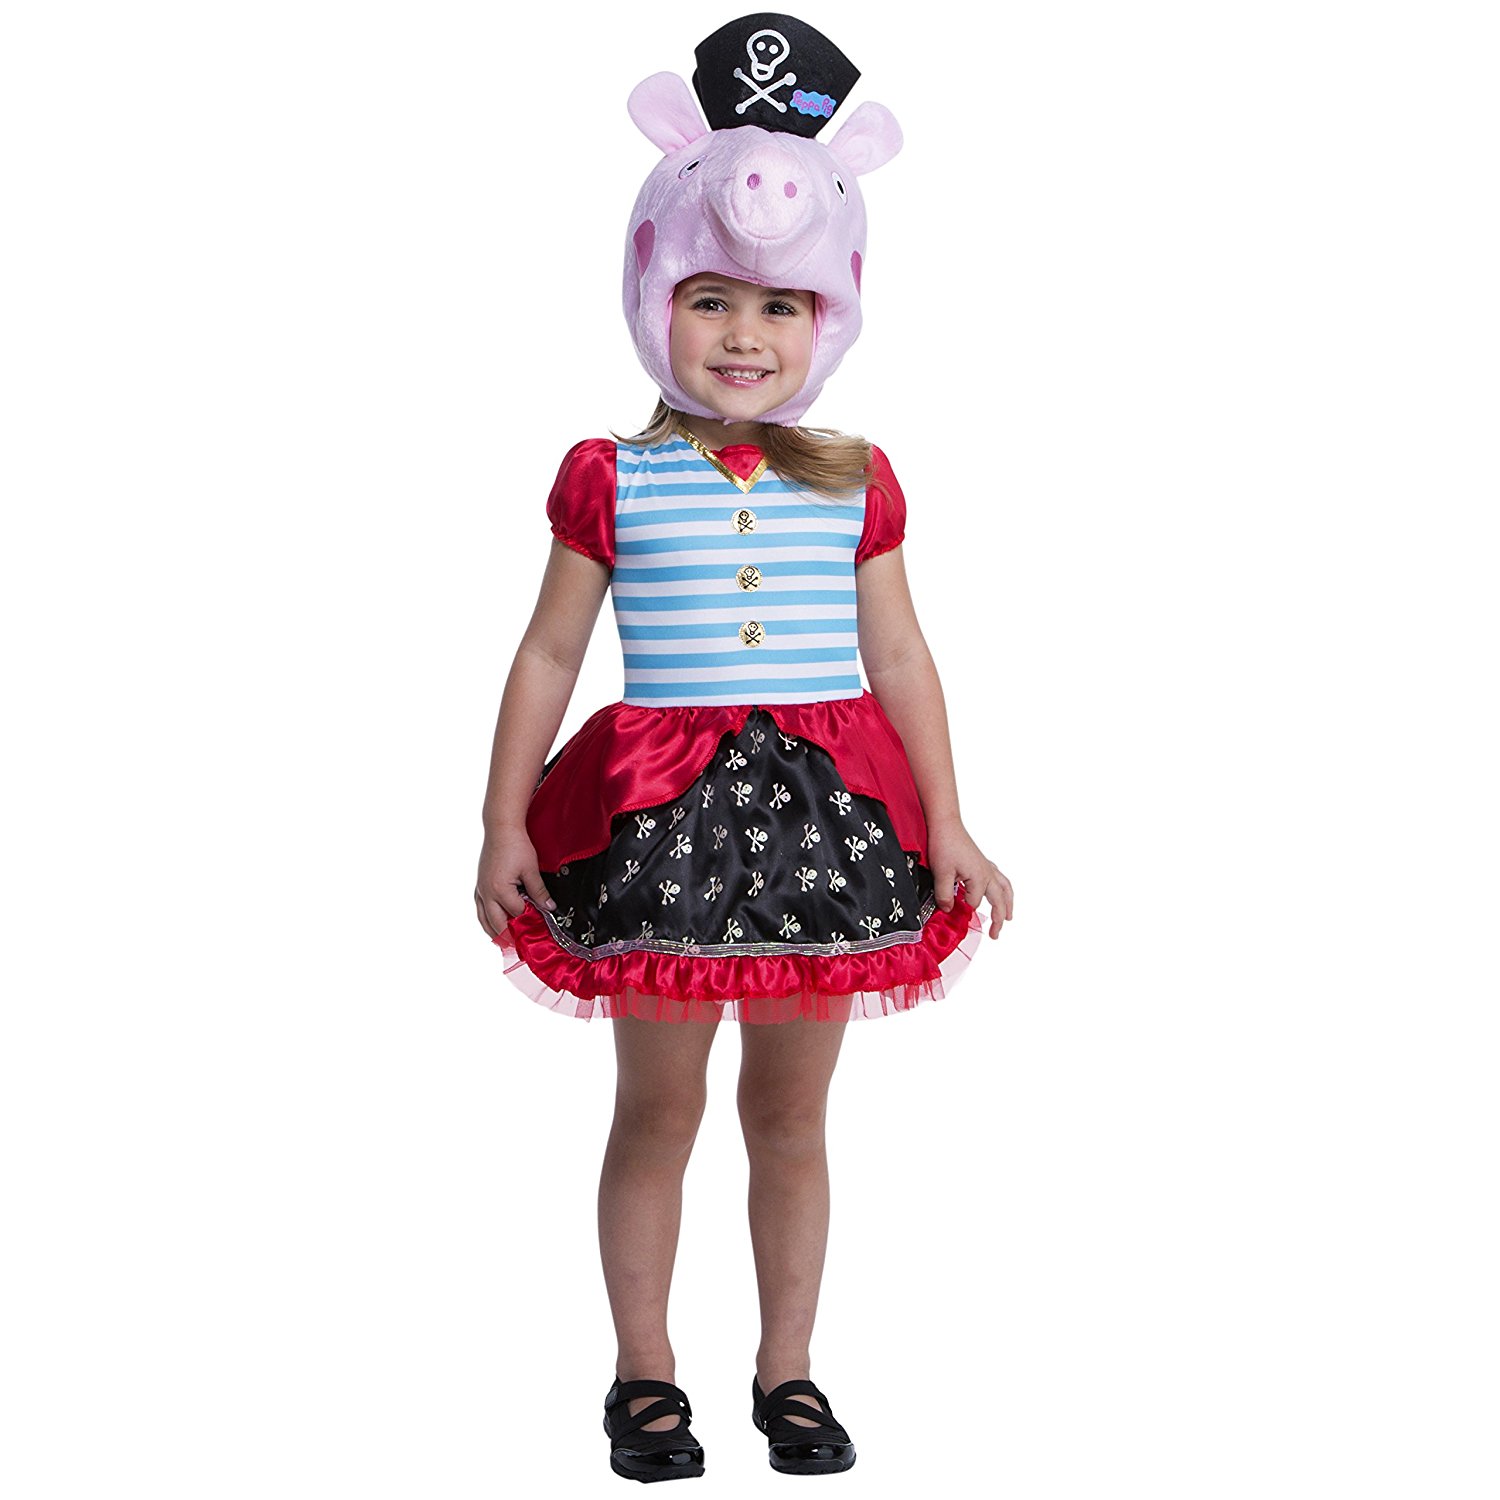 Peppa Pig Pirate Costume For Toddlers (2T)